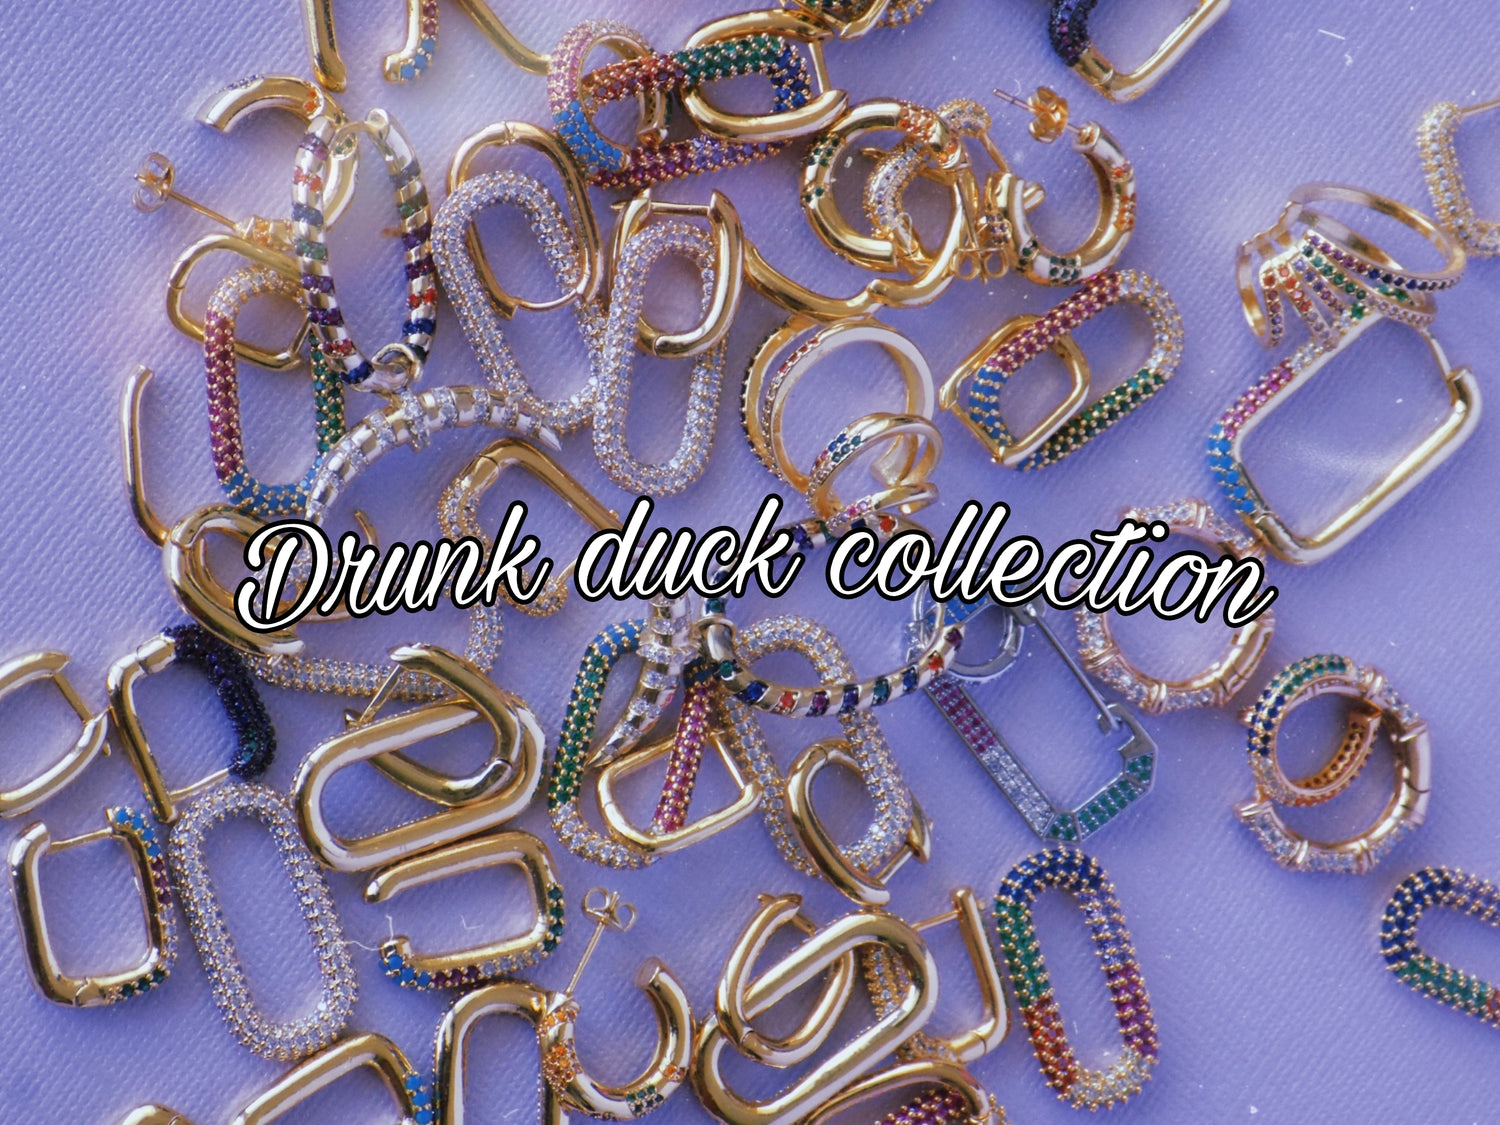 Drunk Duck collection Fall 2020